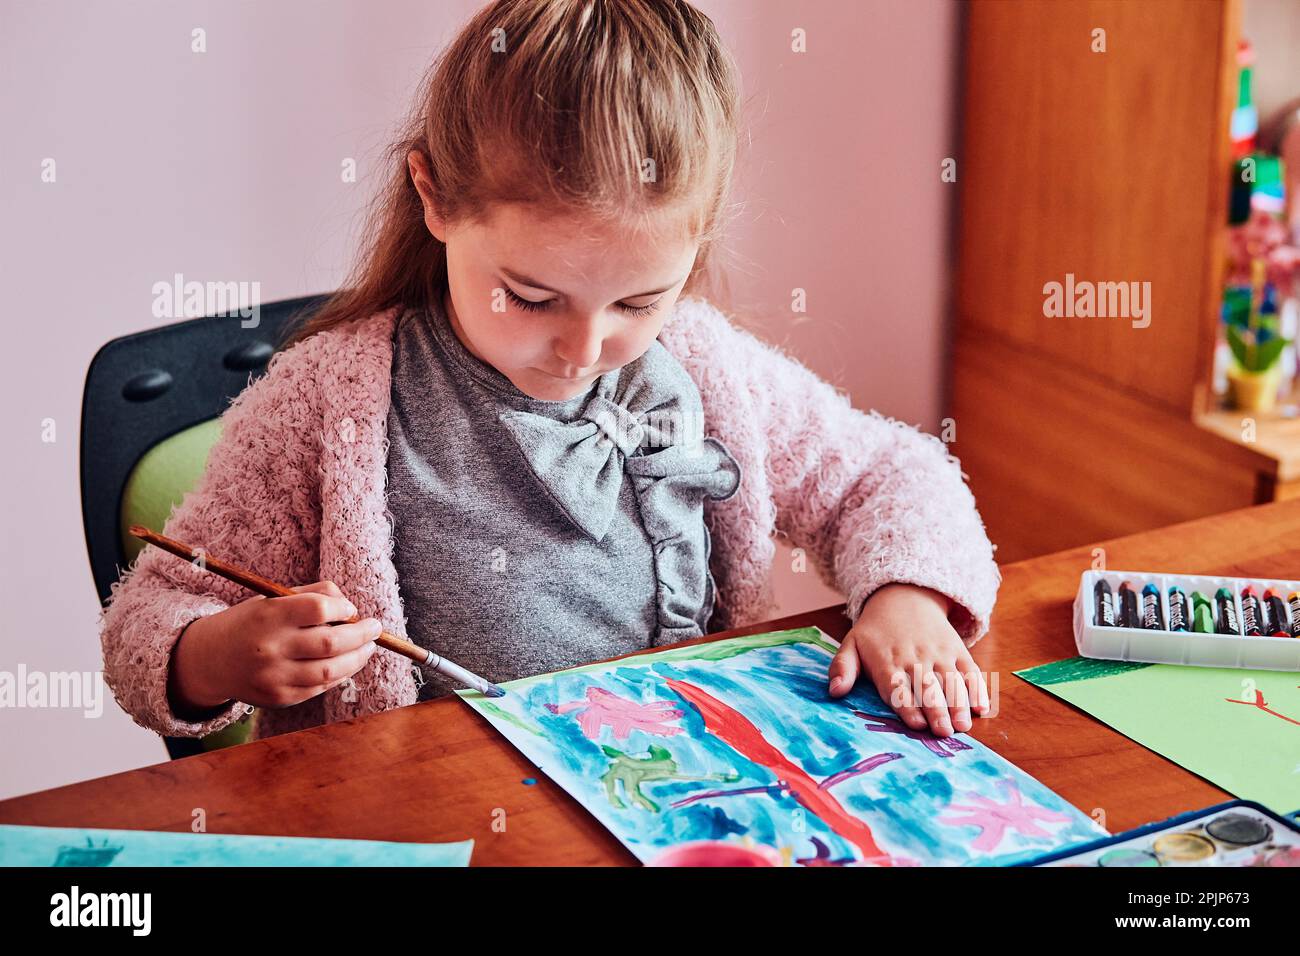 Little girl preschooler painting a picture using colorful paints and crayons. Child having fun making a picture during an art class in the classroom Stock Photo